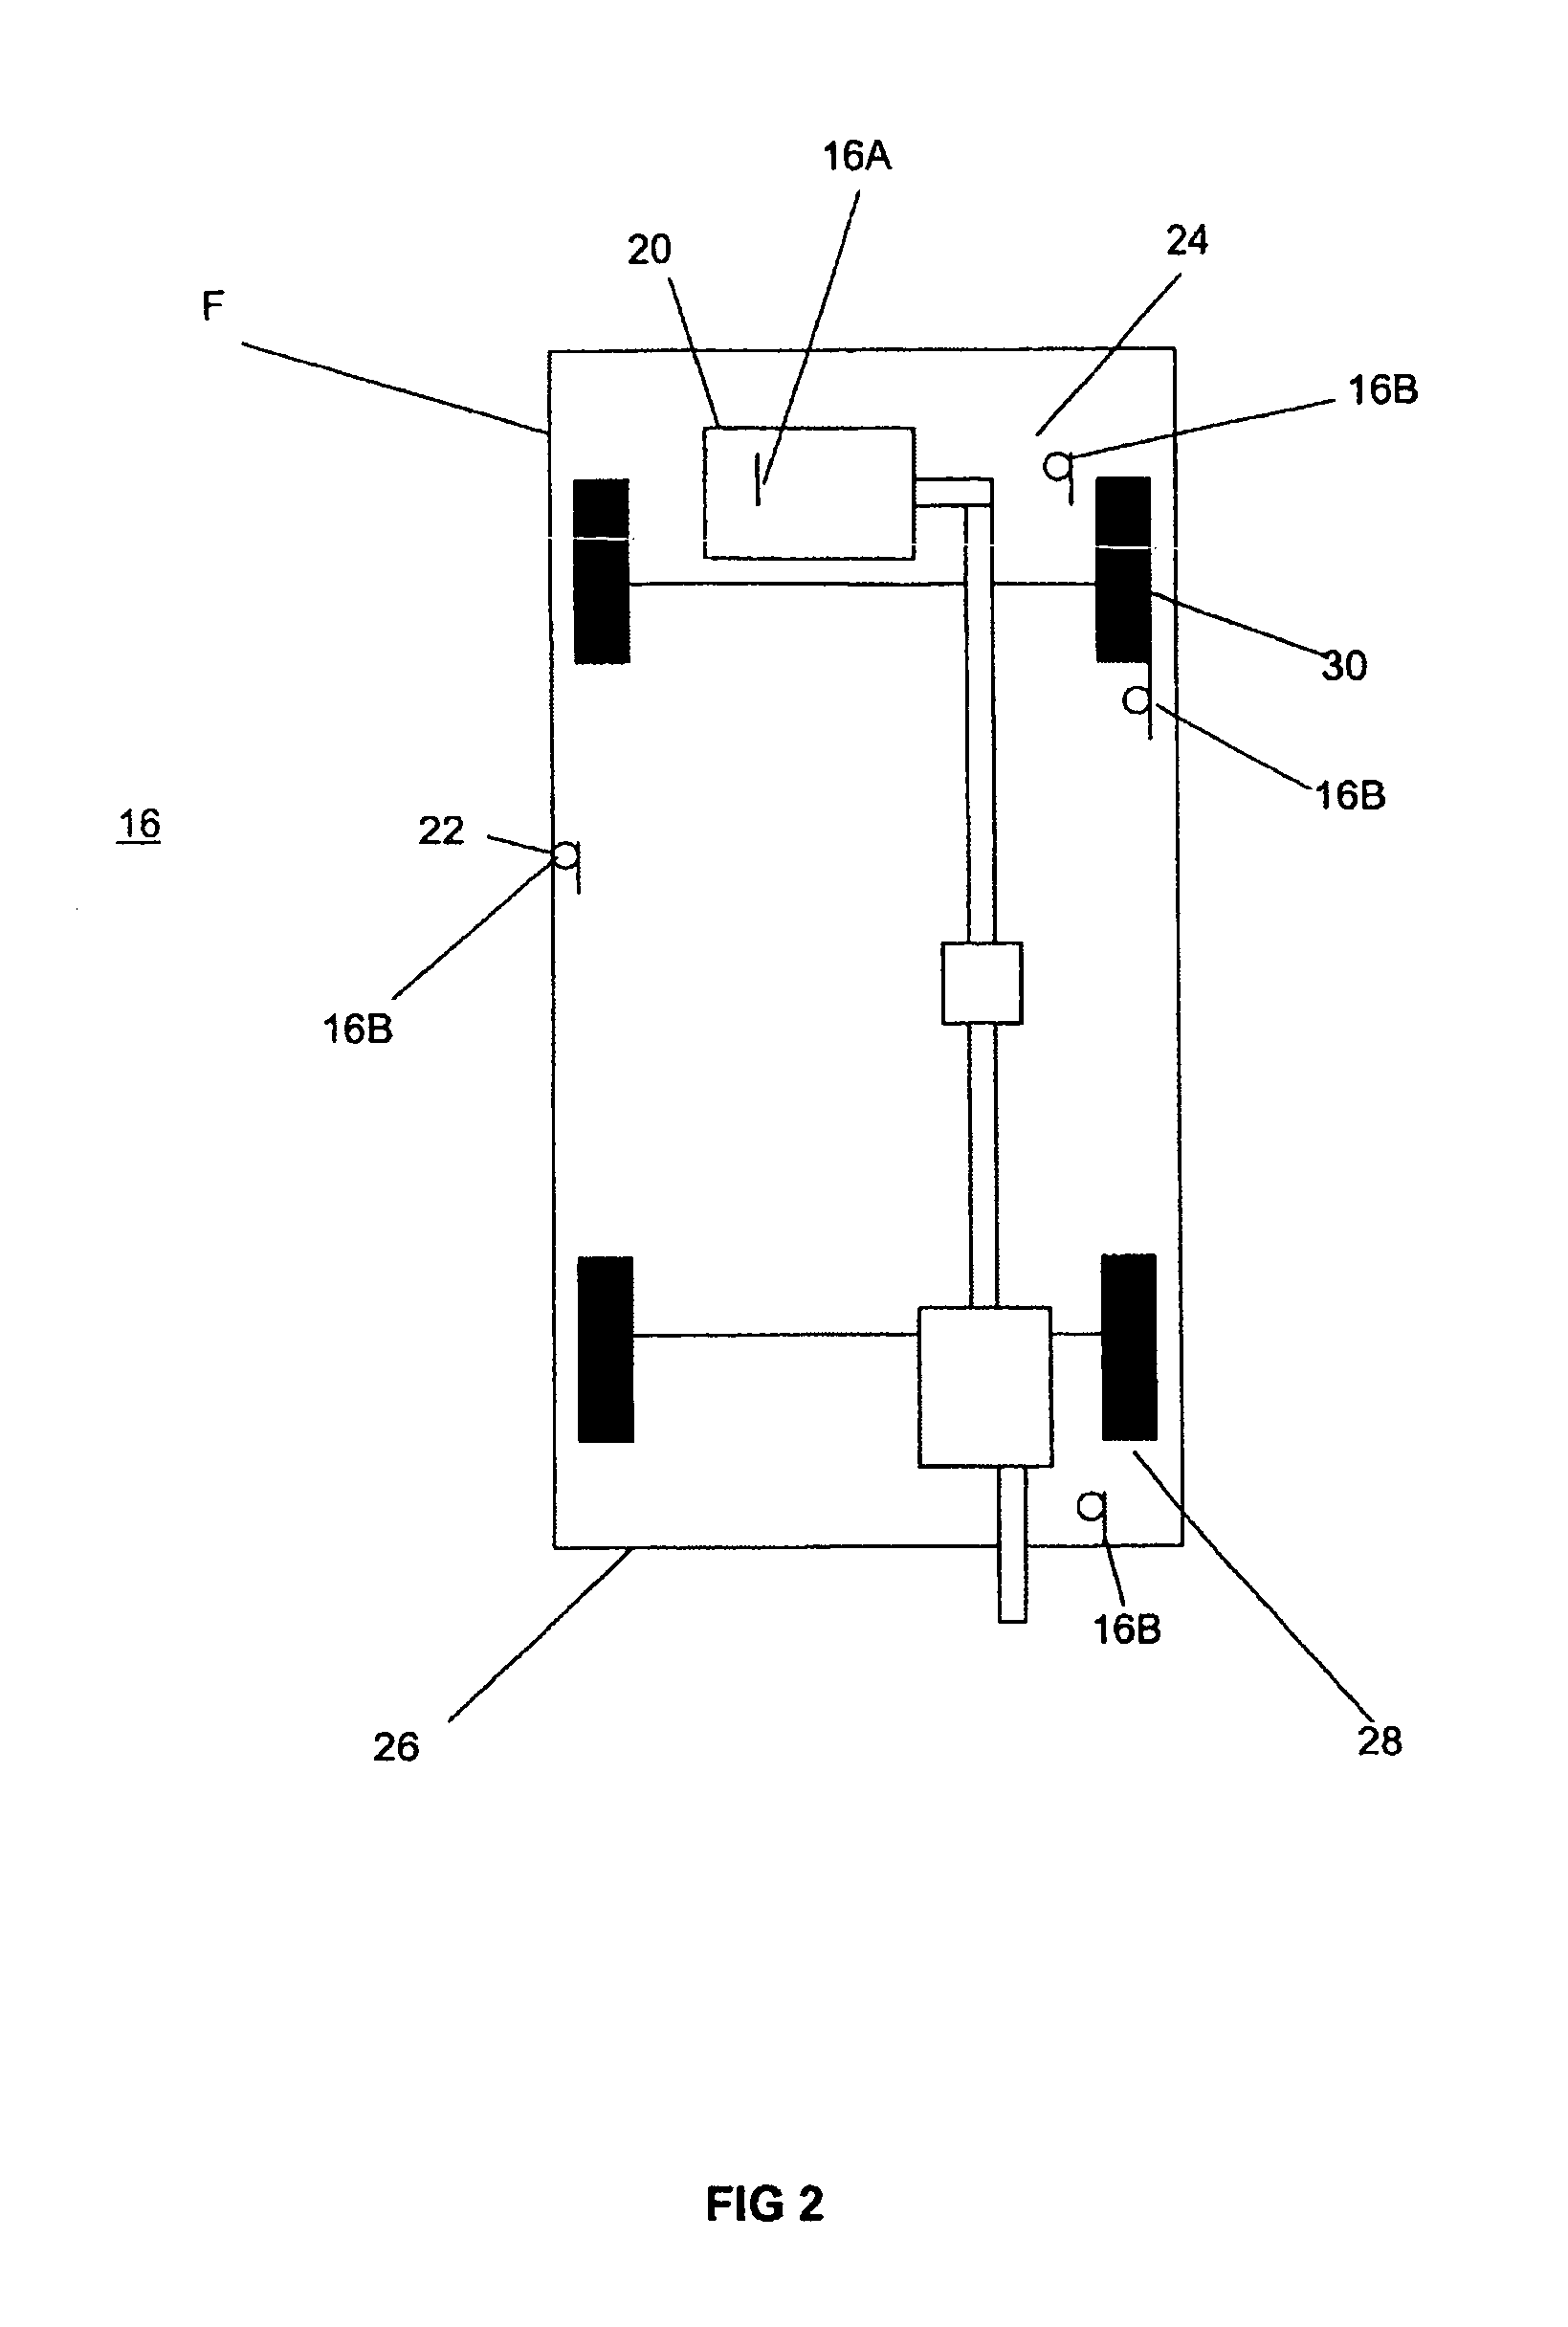 Method and system for controlling and/or regulation a load of a vehicle